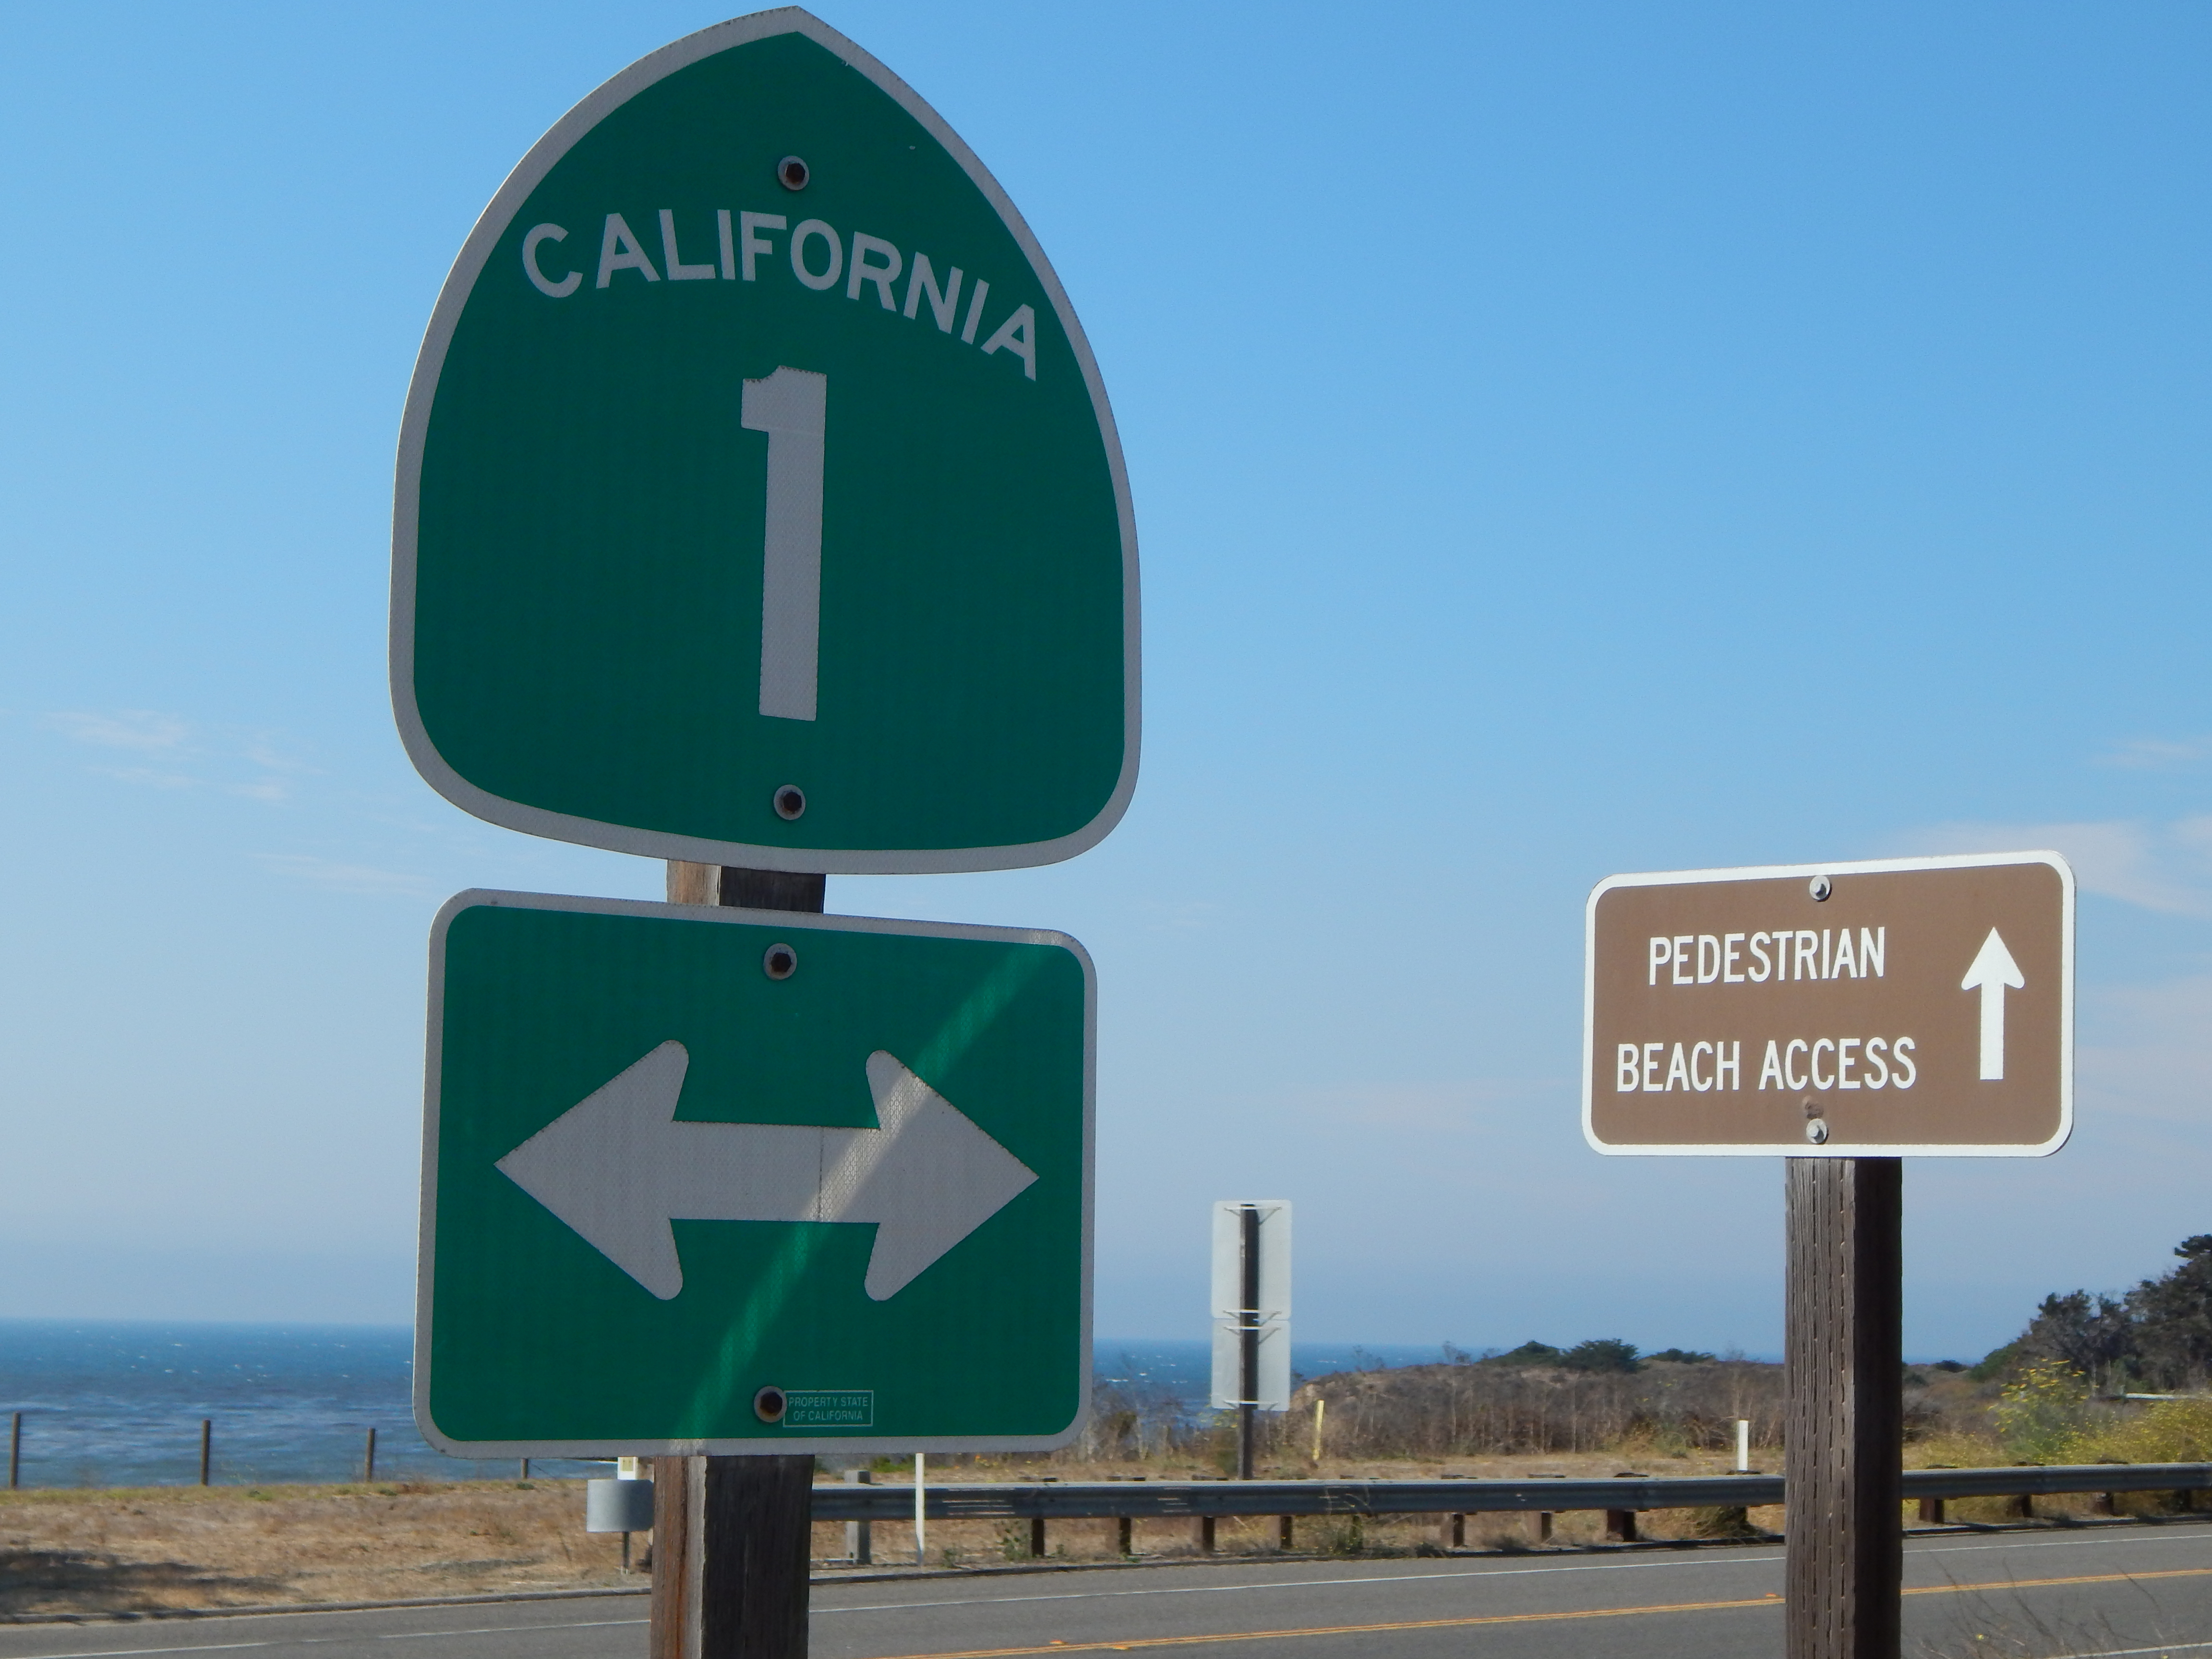 Sign for the 1 freeway and sign reading pedestrian beach access both with arrows in California with beach in backgroun